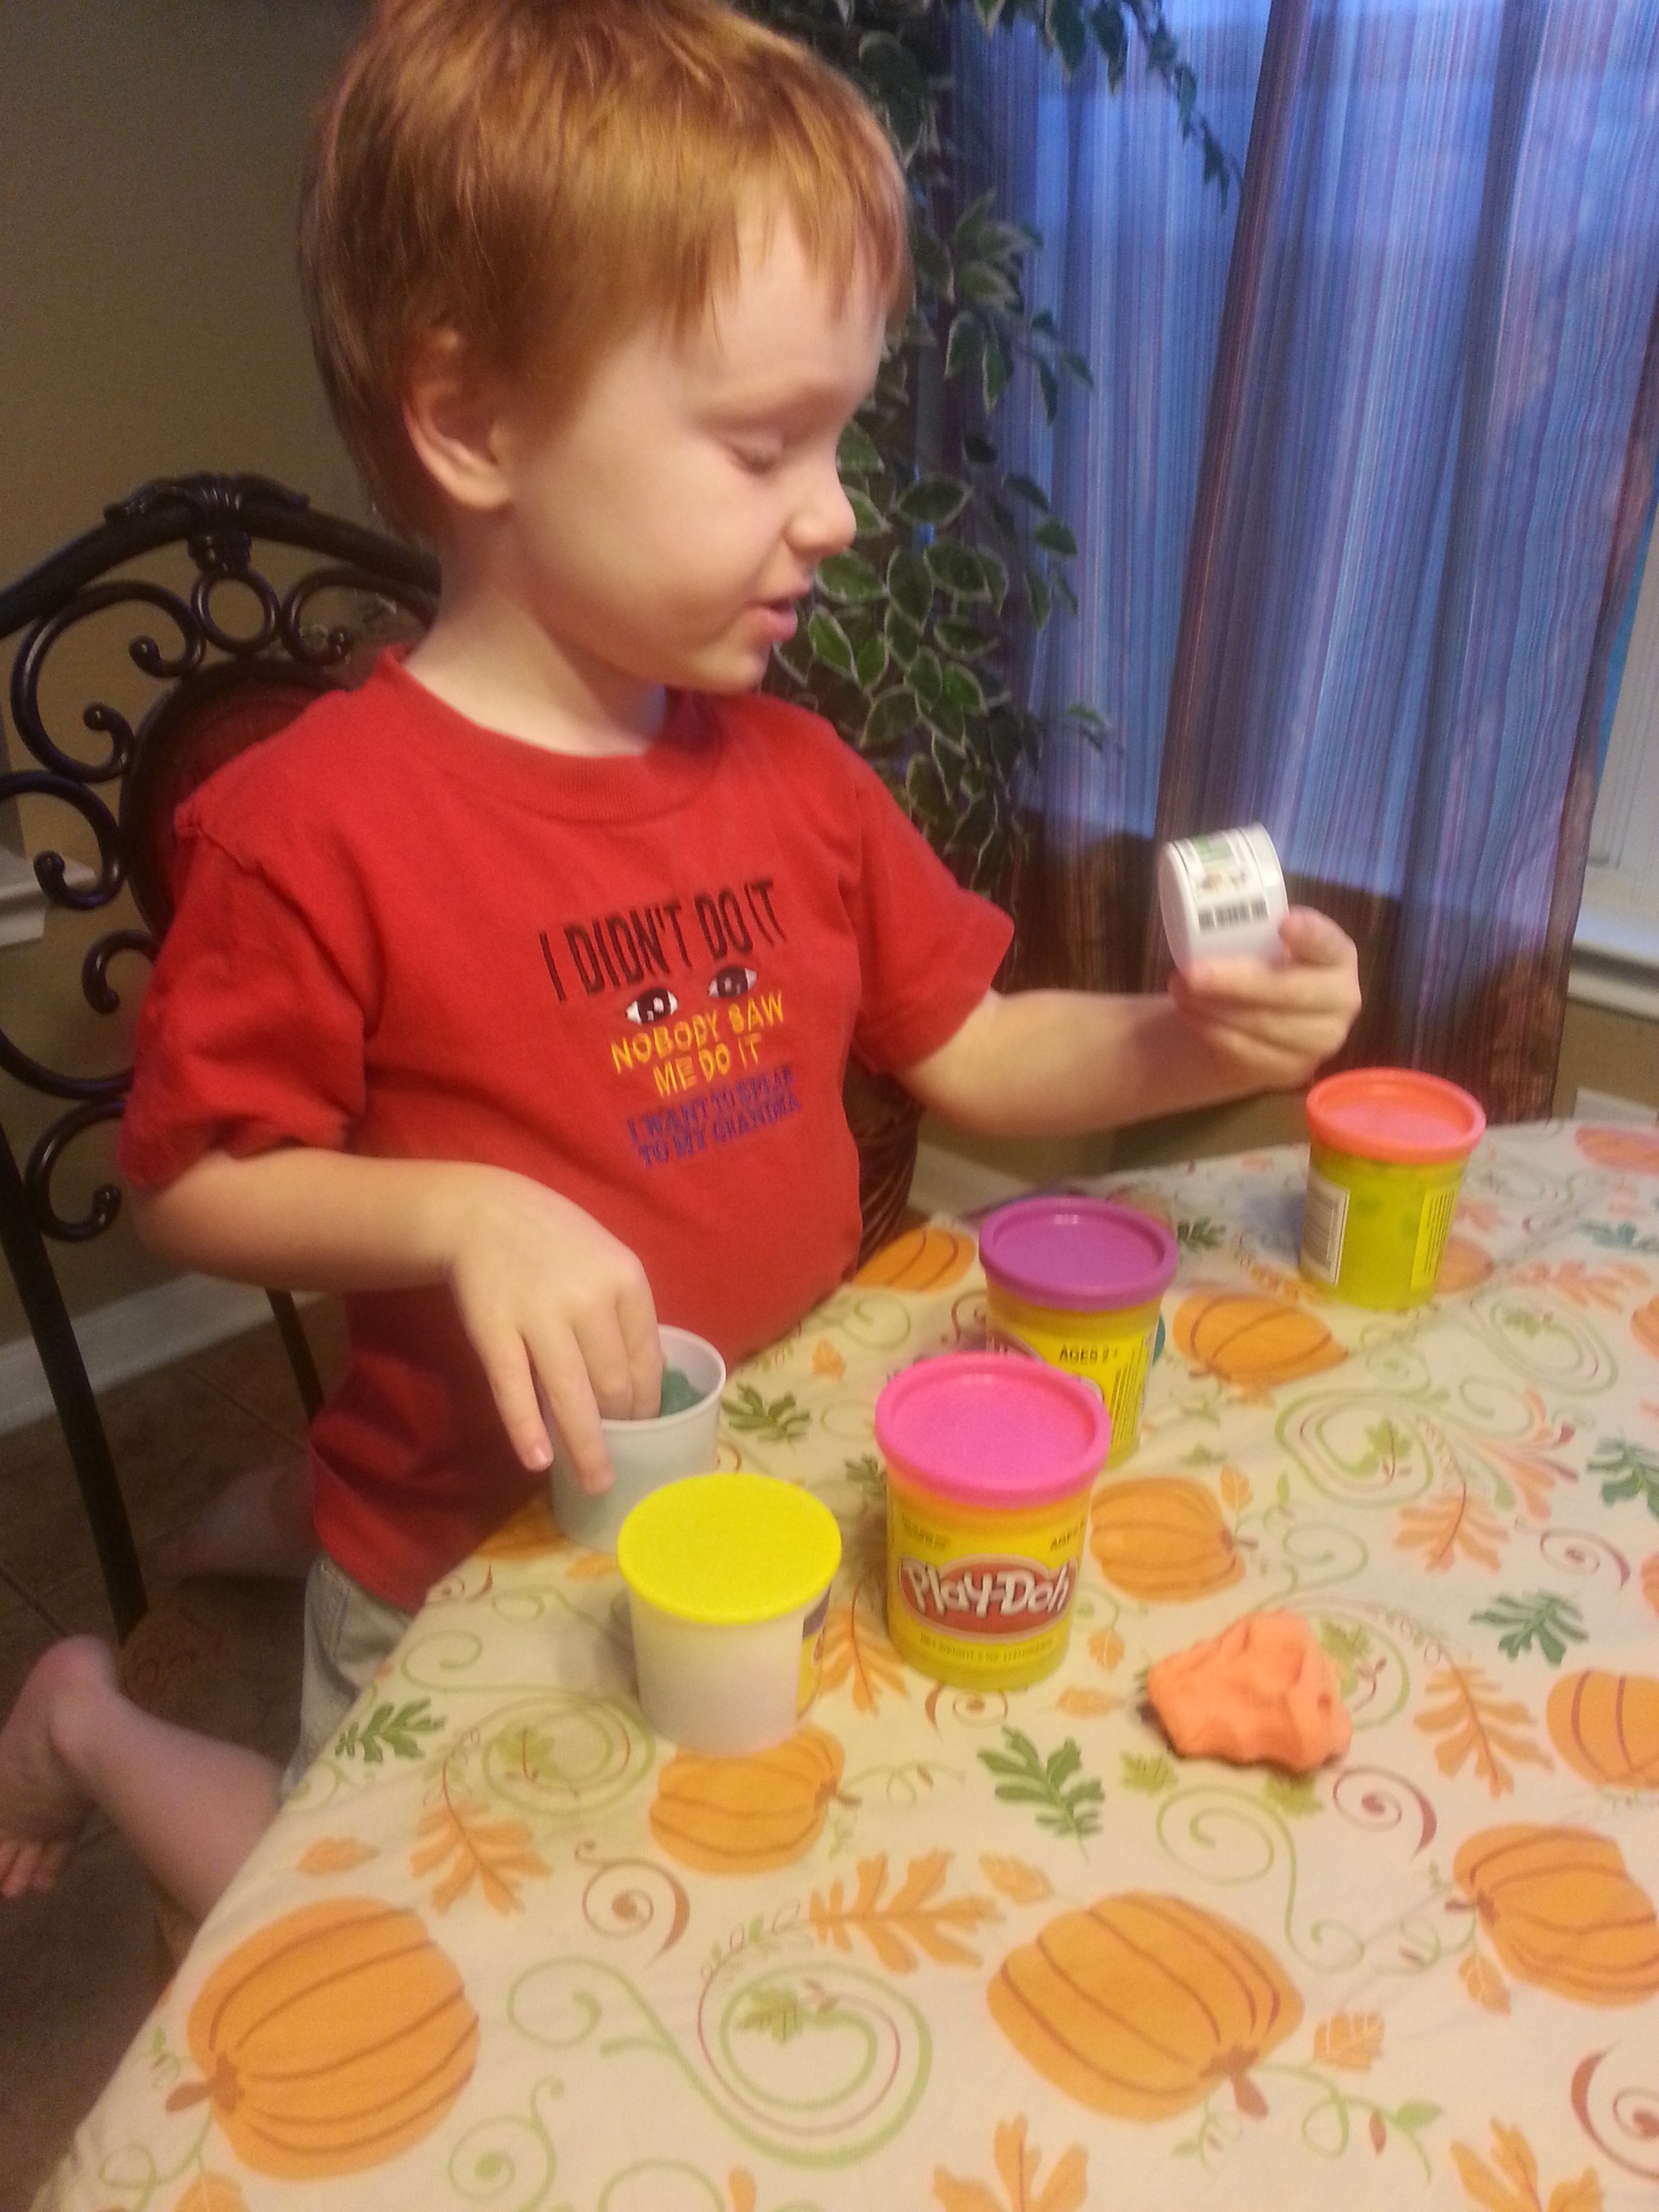 Play Doh helps to develop fine motor skills